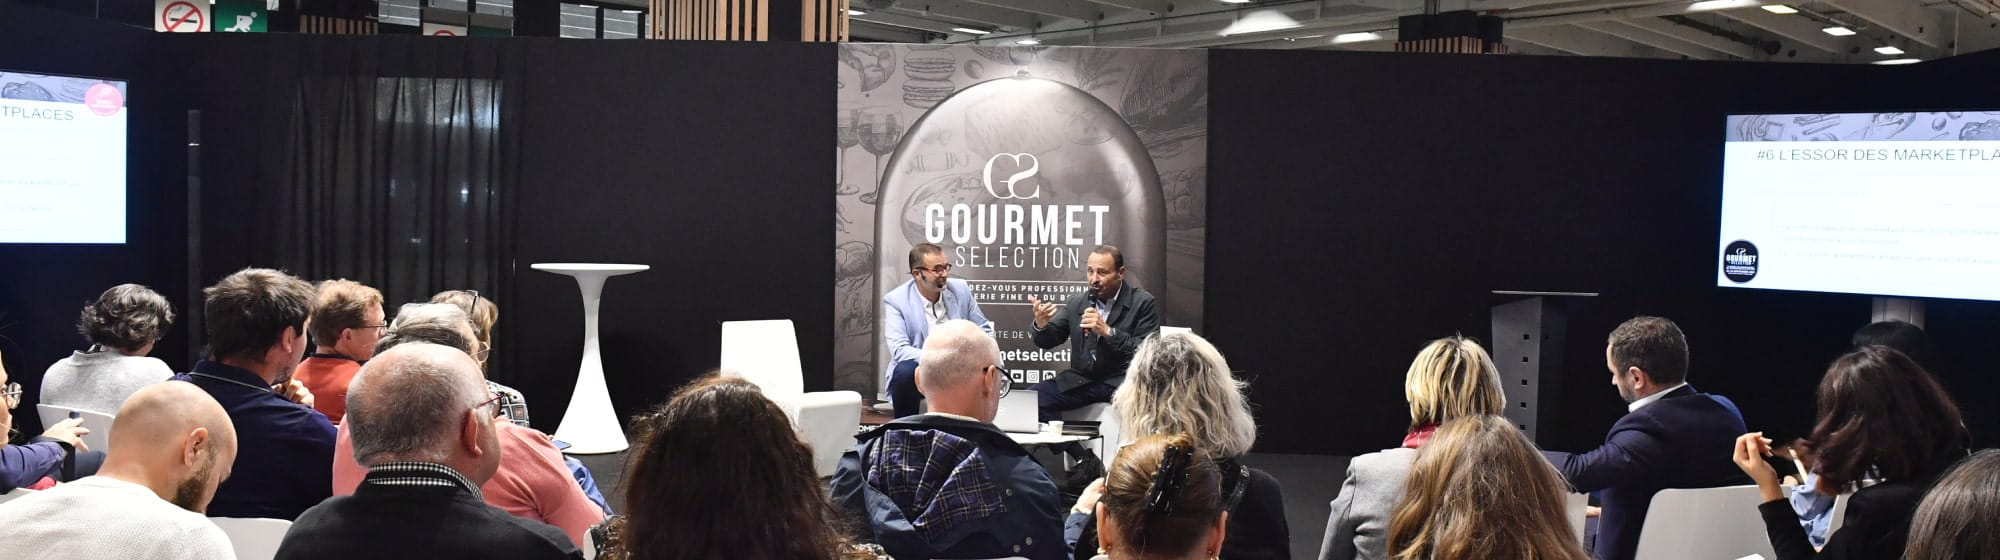 Conference on Gourmet Selection